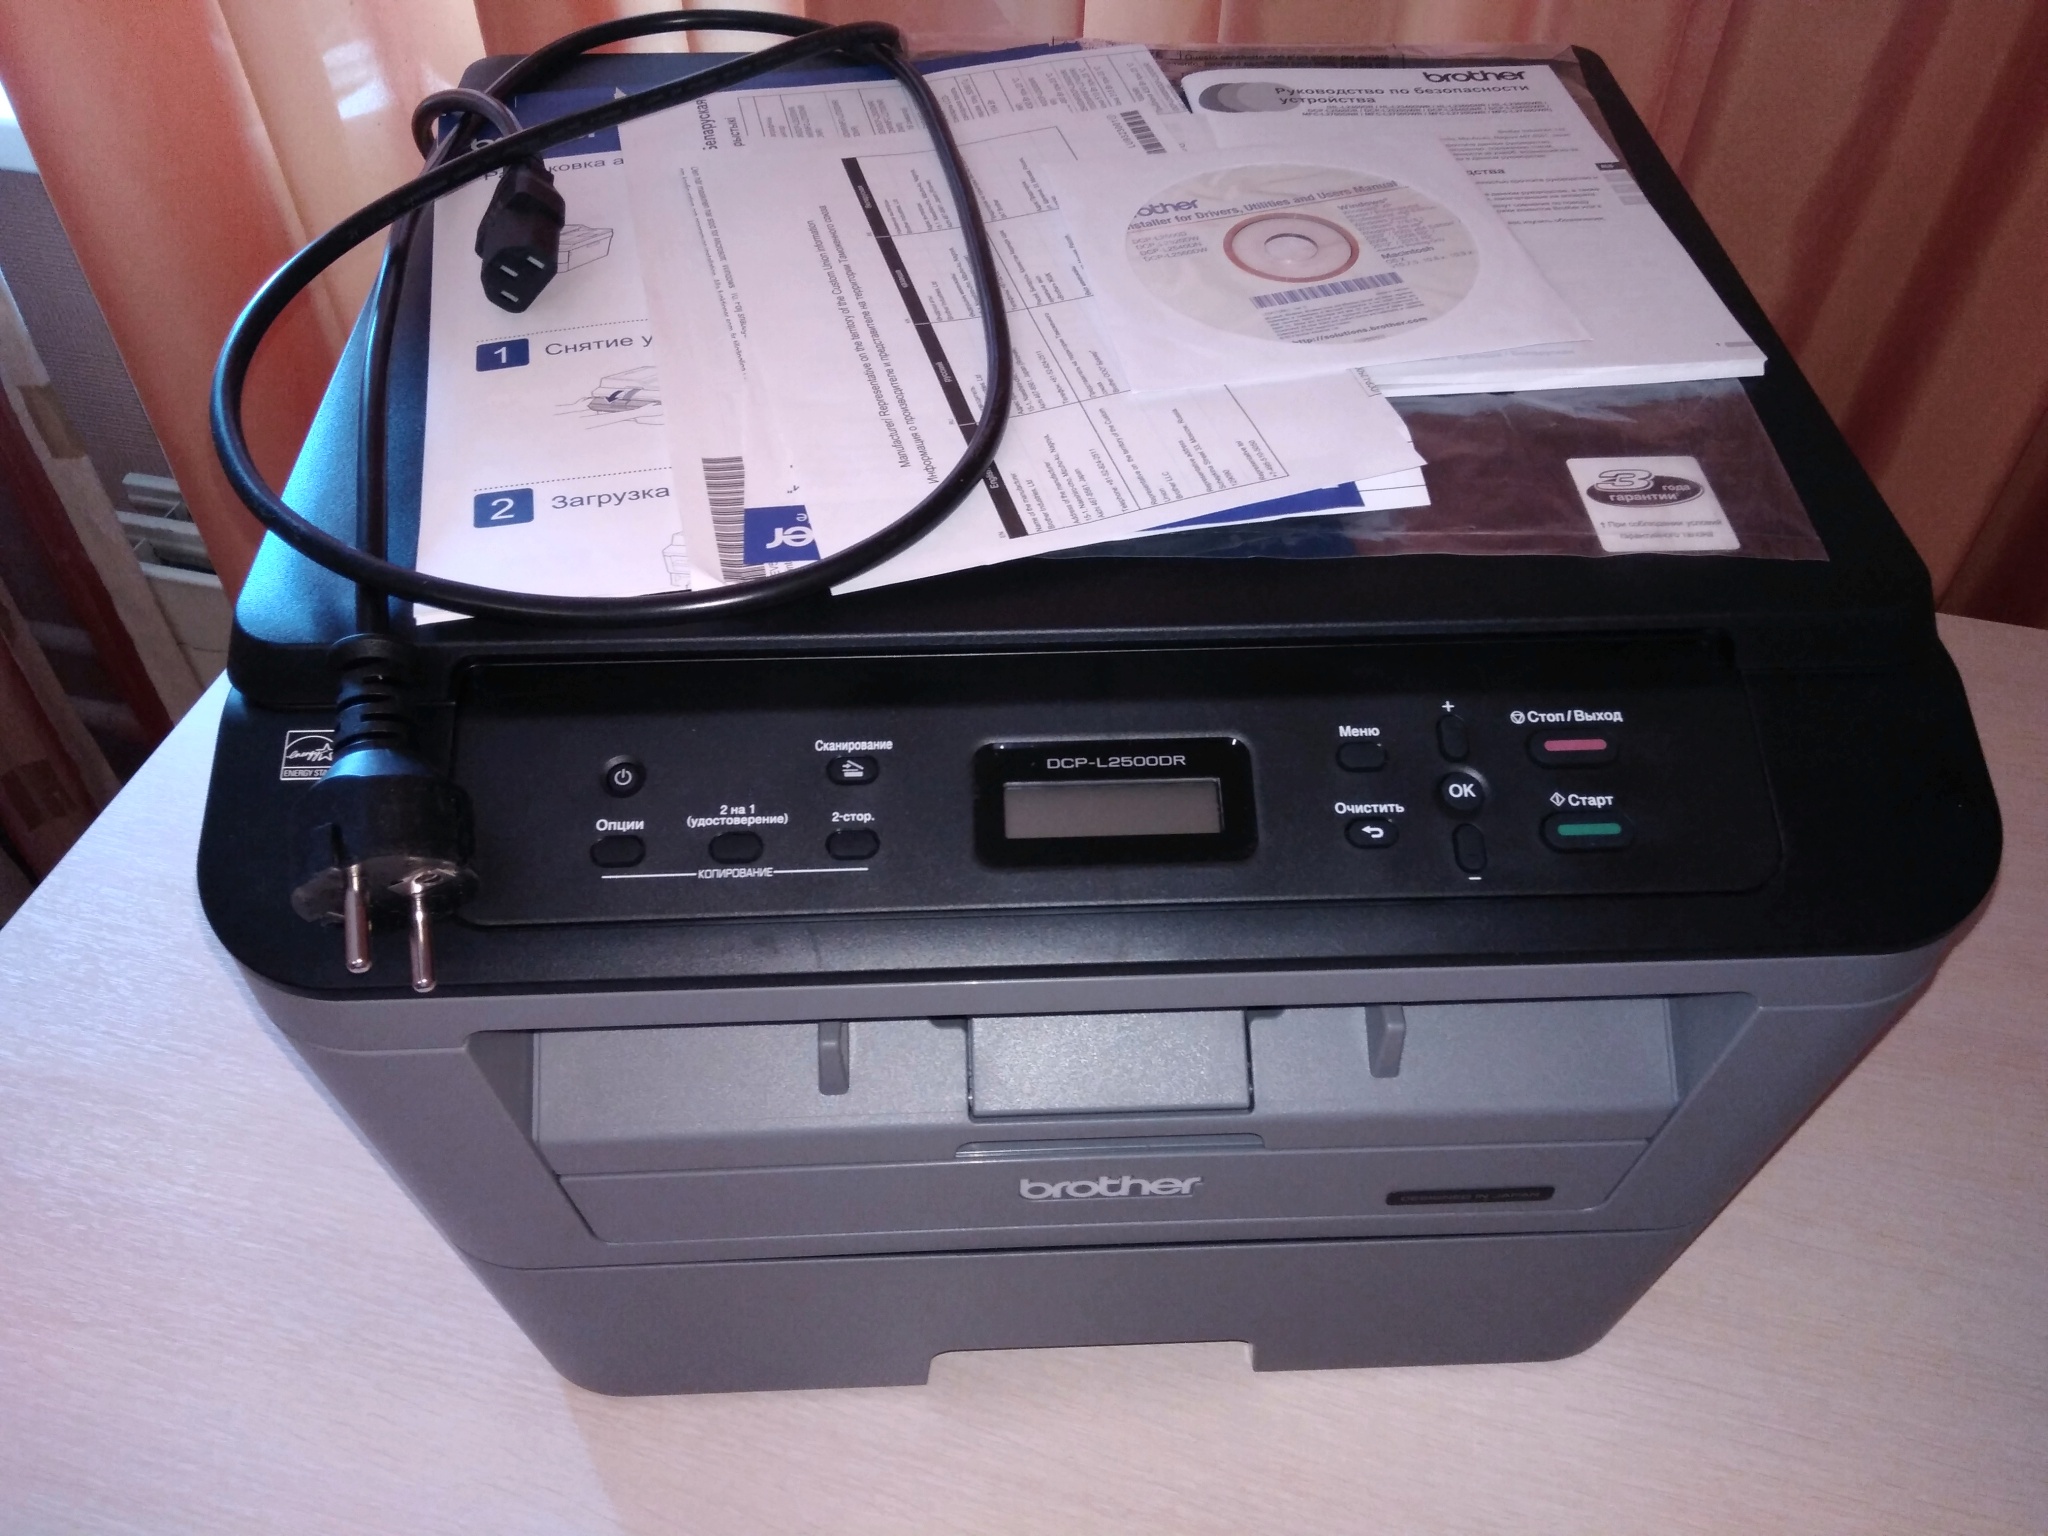 Brother dcp 2500dr. Принтер brother DCP l2500dr. Brother DCP-l2500dr. Принтер бротхер DCP-l2500dr. Brother DCP-1602r.